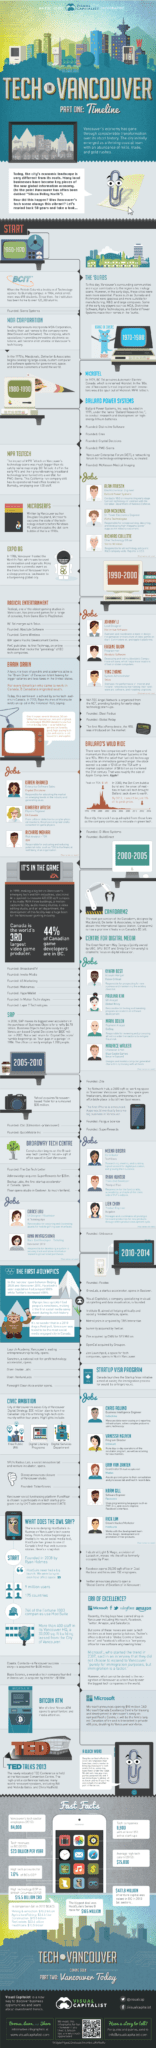 tech-in-vancouver-history-infographic